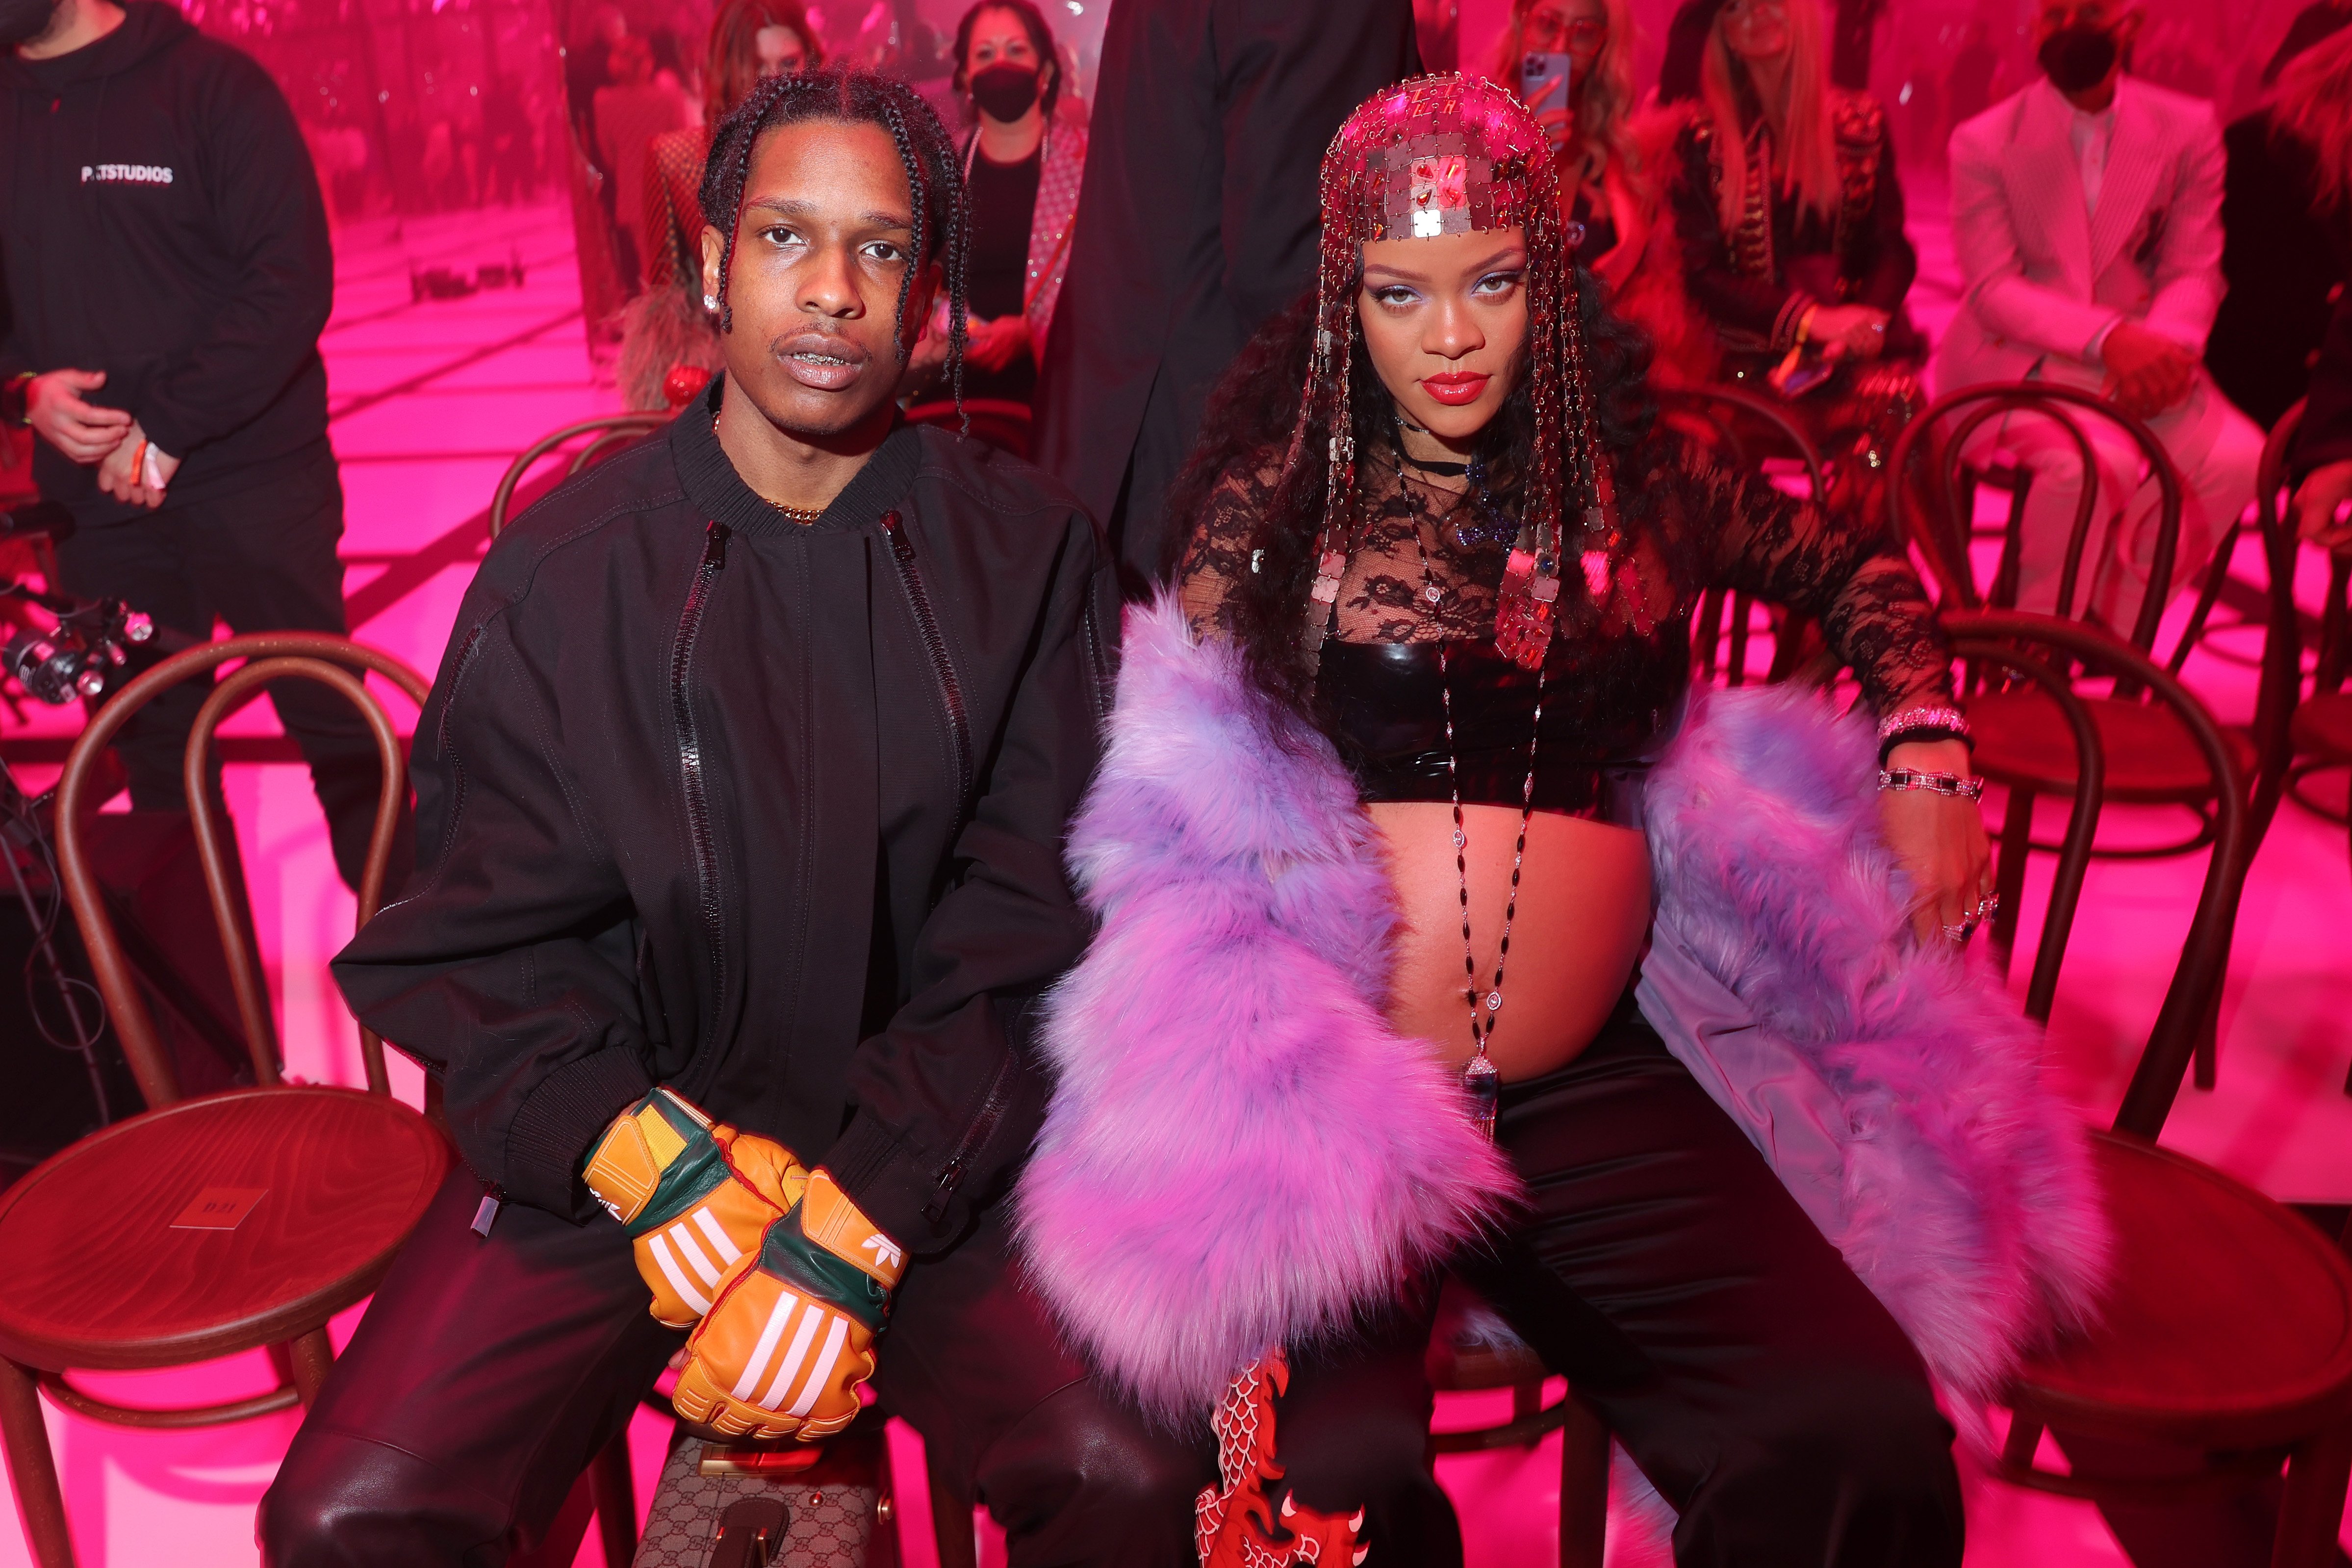 Asap Rocky and Rihanna at the Gucci show during Milan Fashion Week Fall/Winter 2022/23 on February 25, 2022, in Milan, Italy. | Source: Victor Boyko/Getty Images